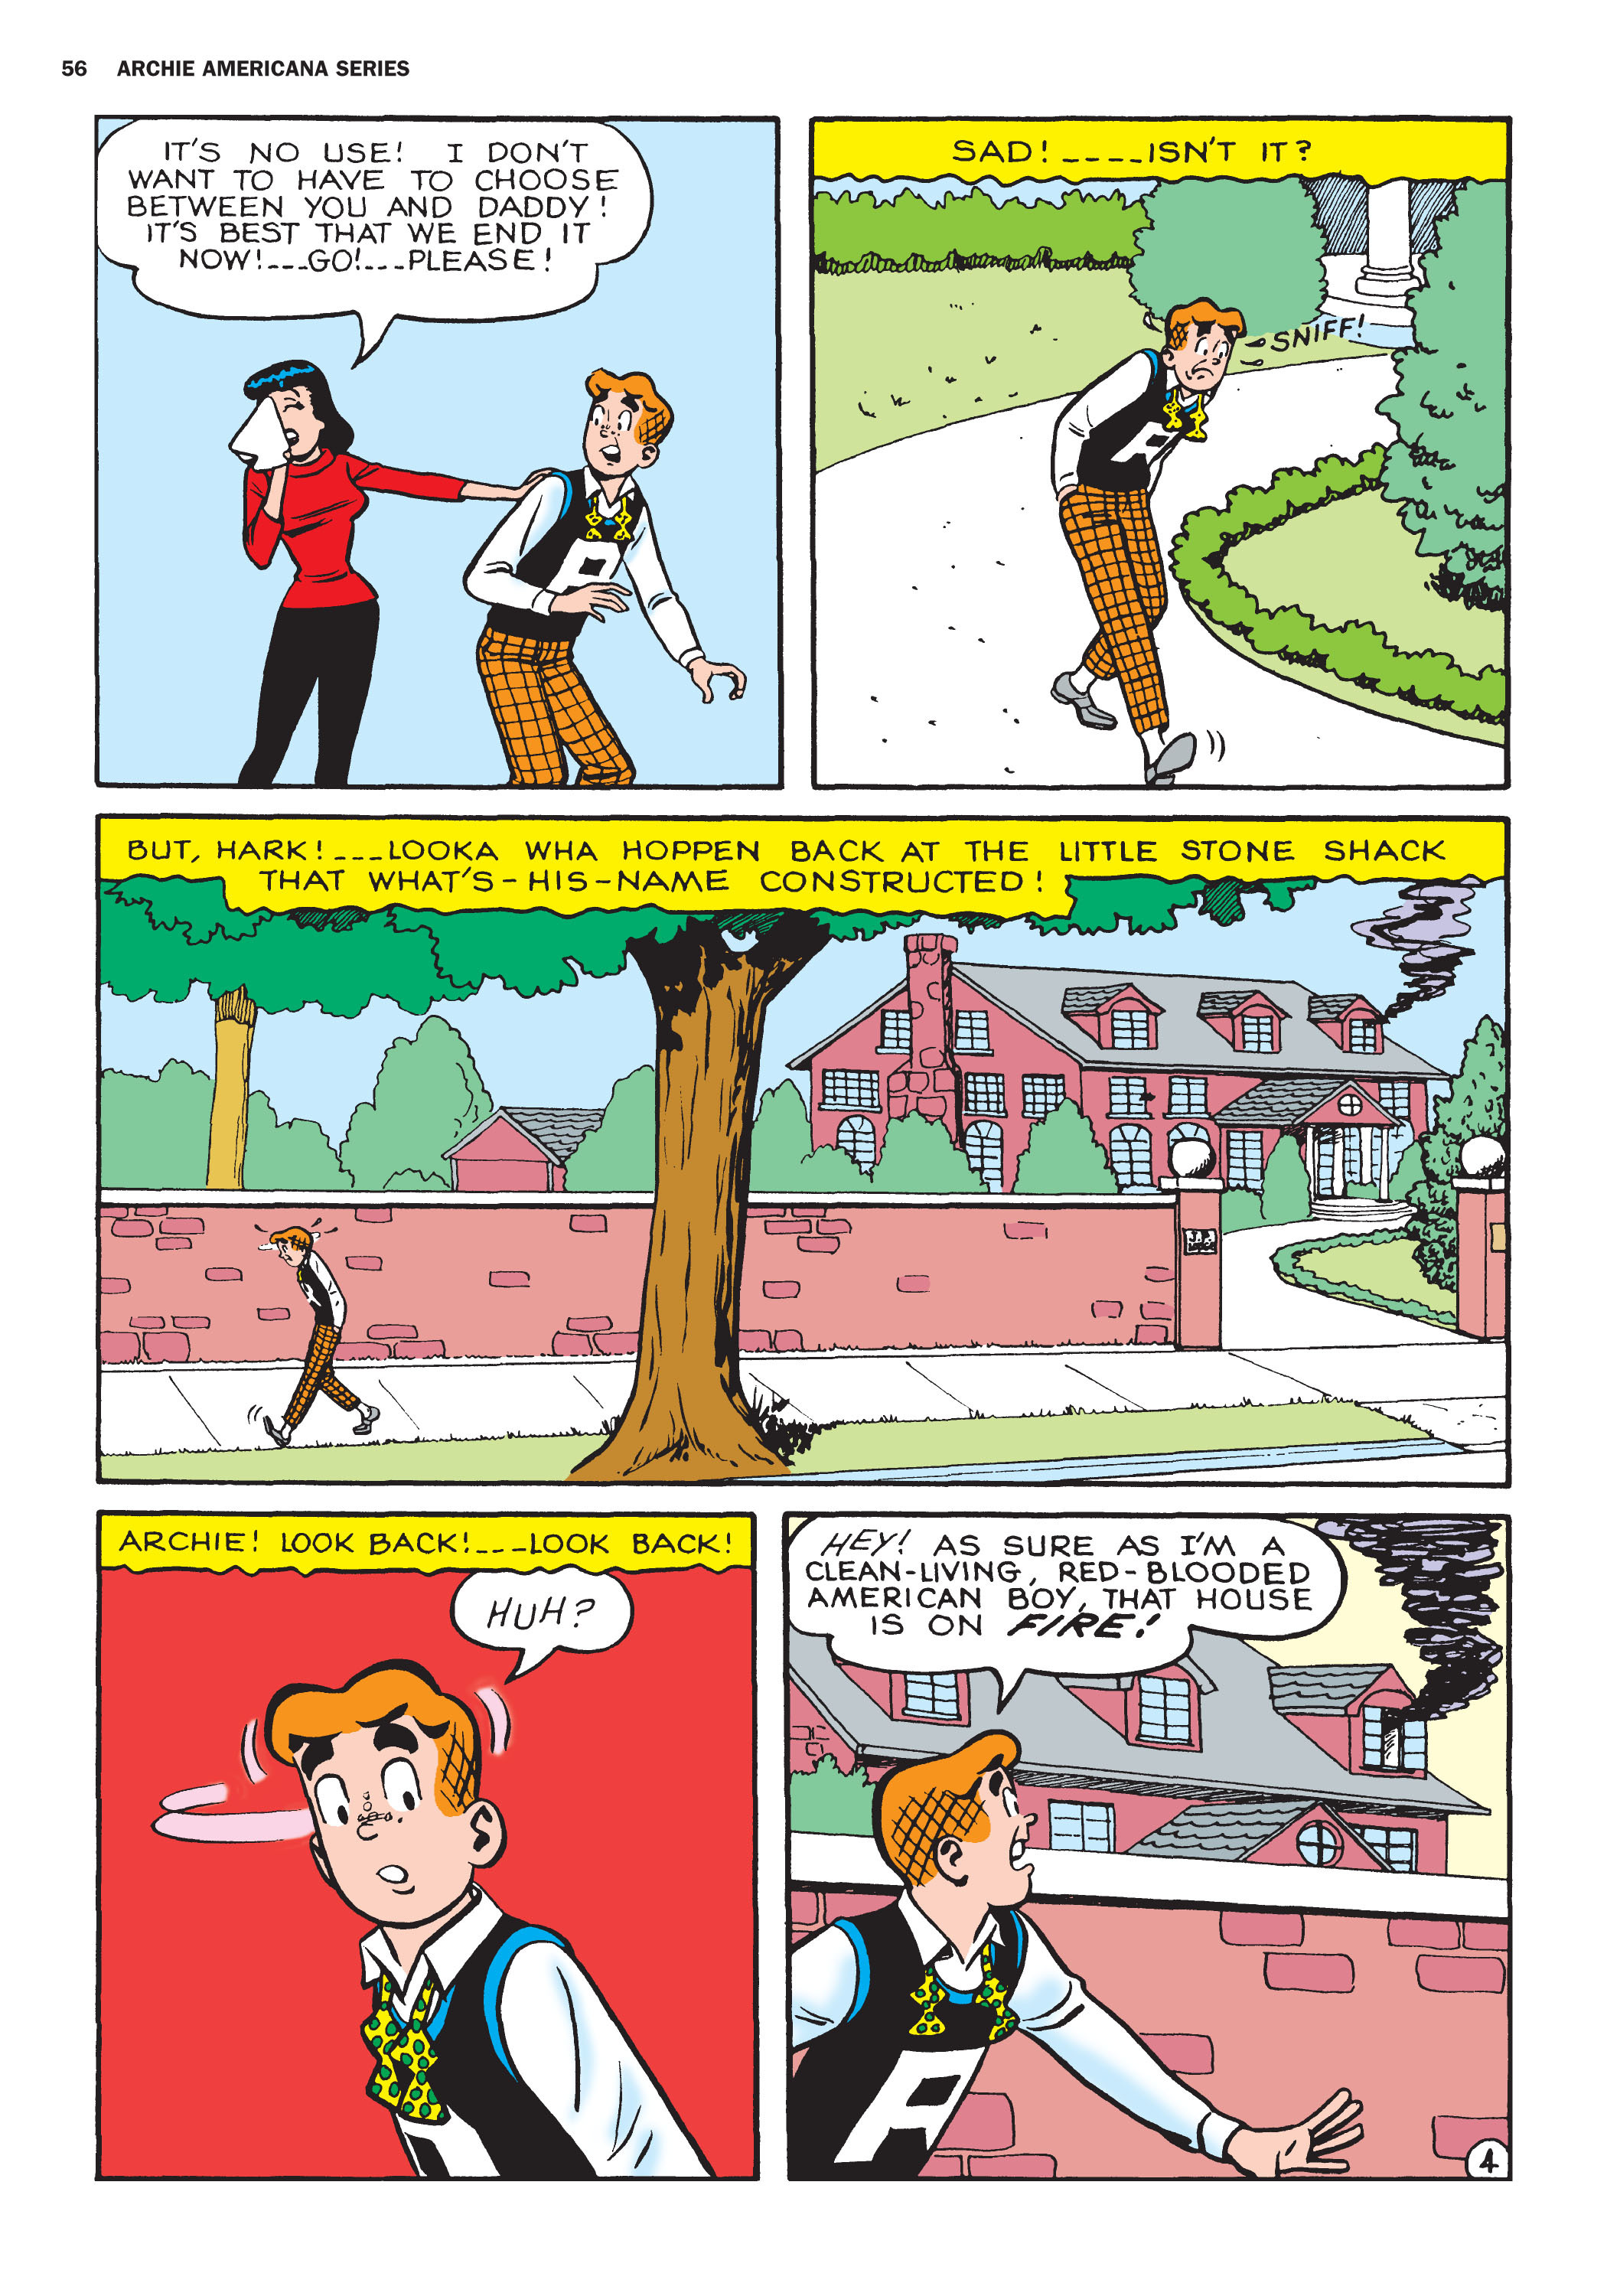 Read online Archie Americana Series comic -  Issue # TPB 8 - 57